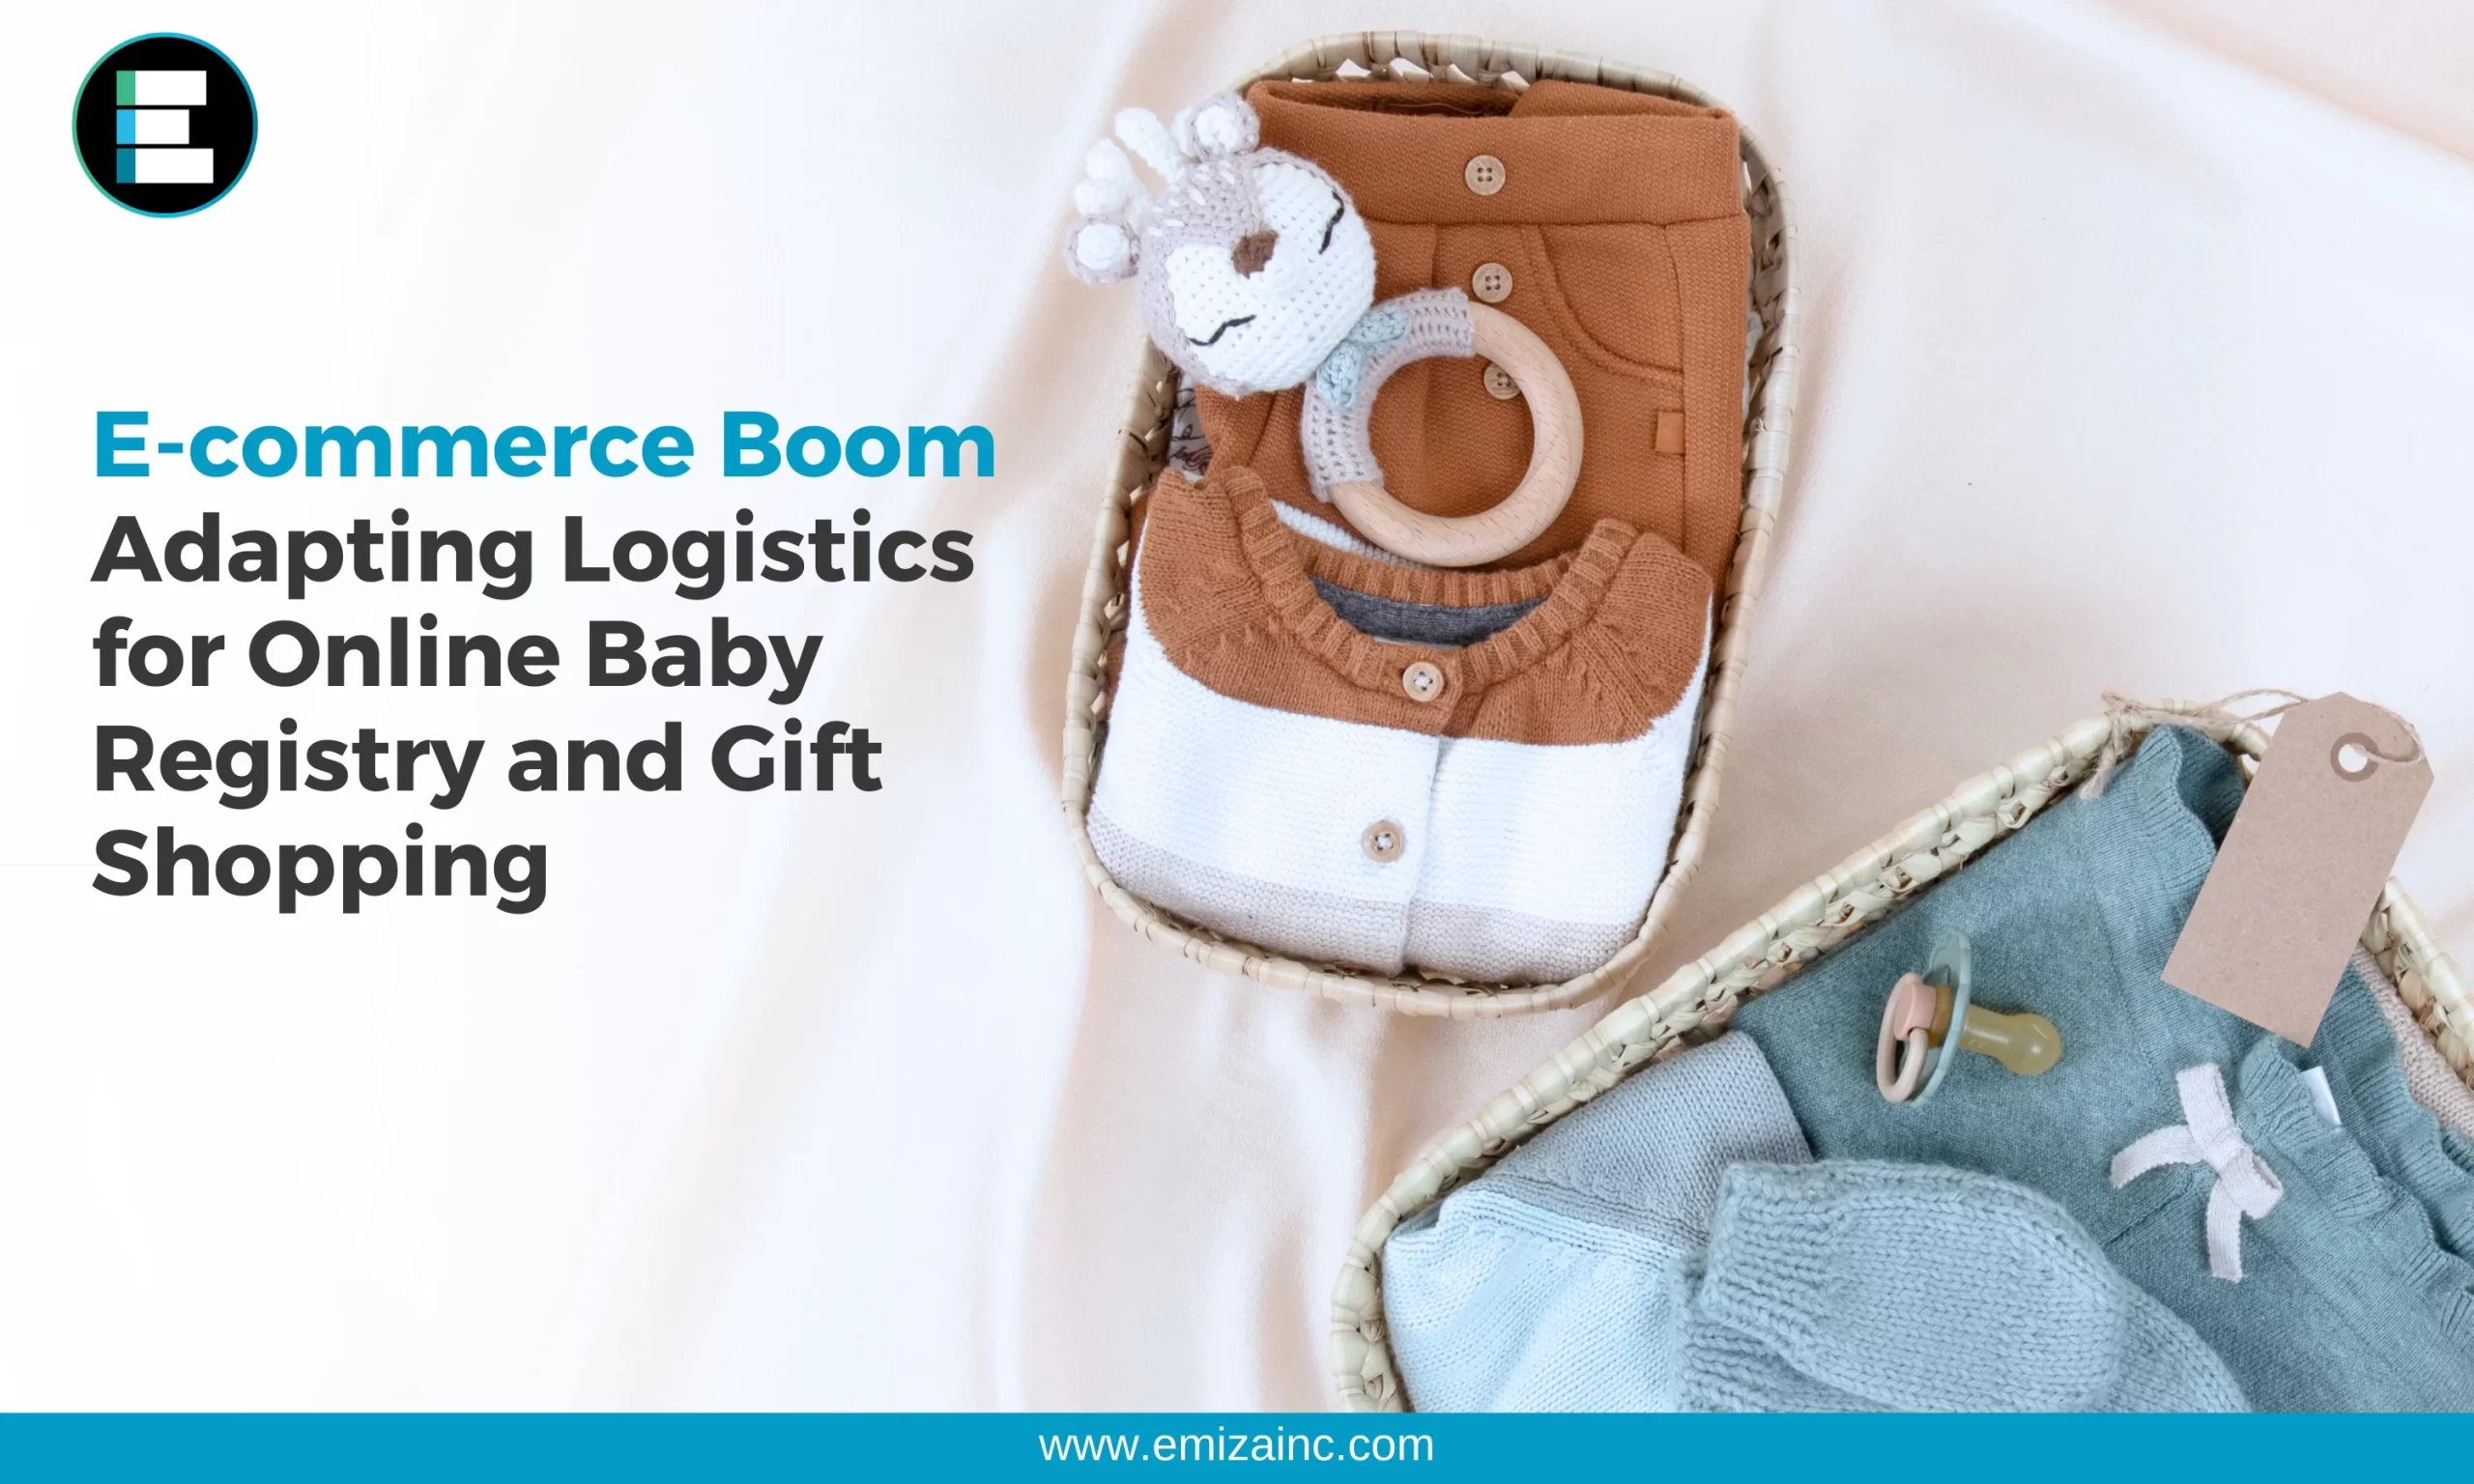 E-commerce Boom: Adapting Logistics for Online Baby Registry and Gift Shopping